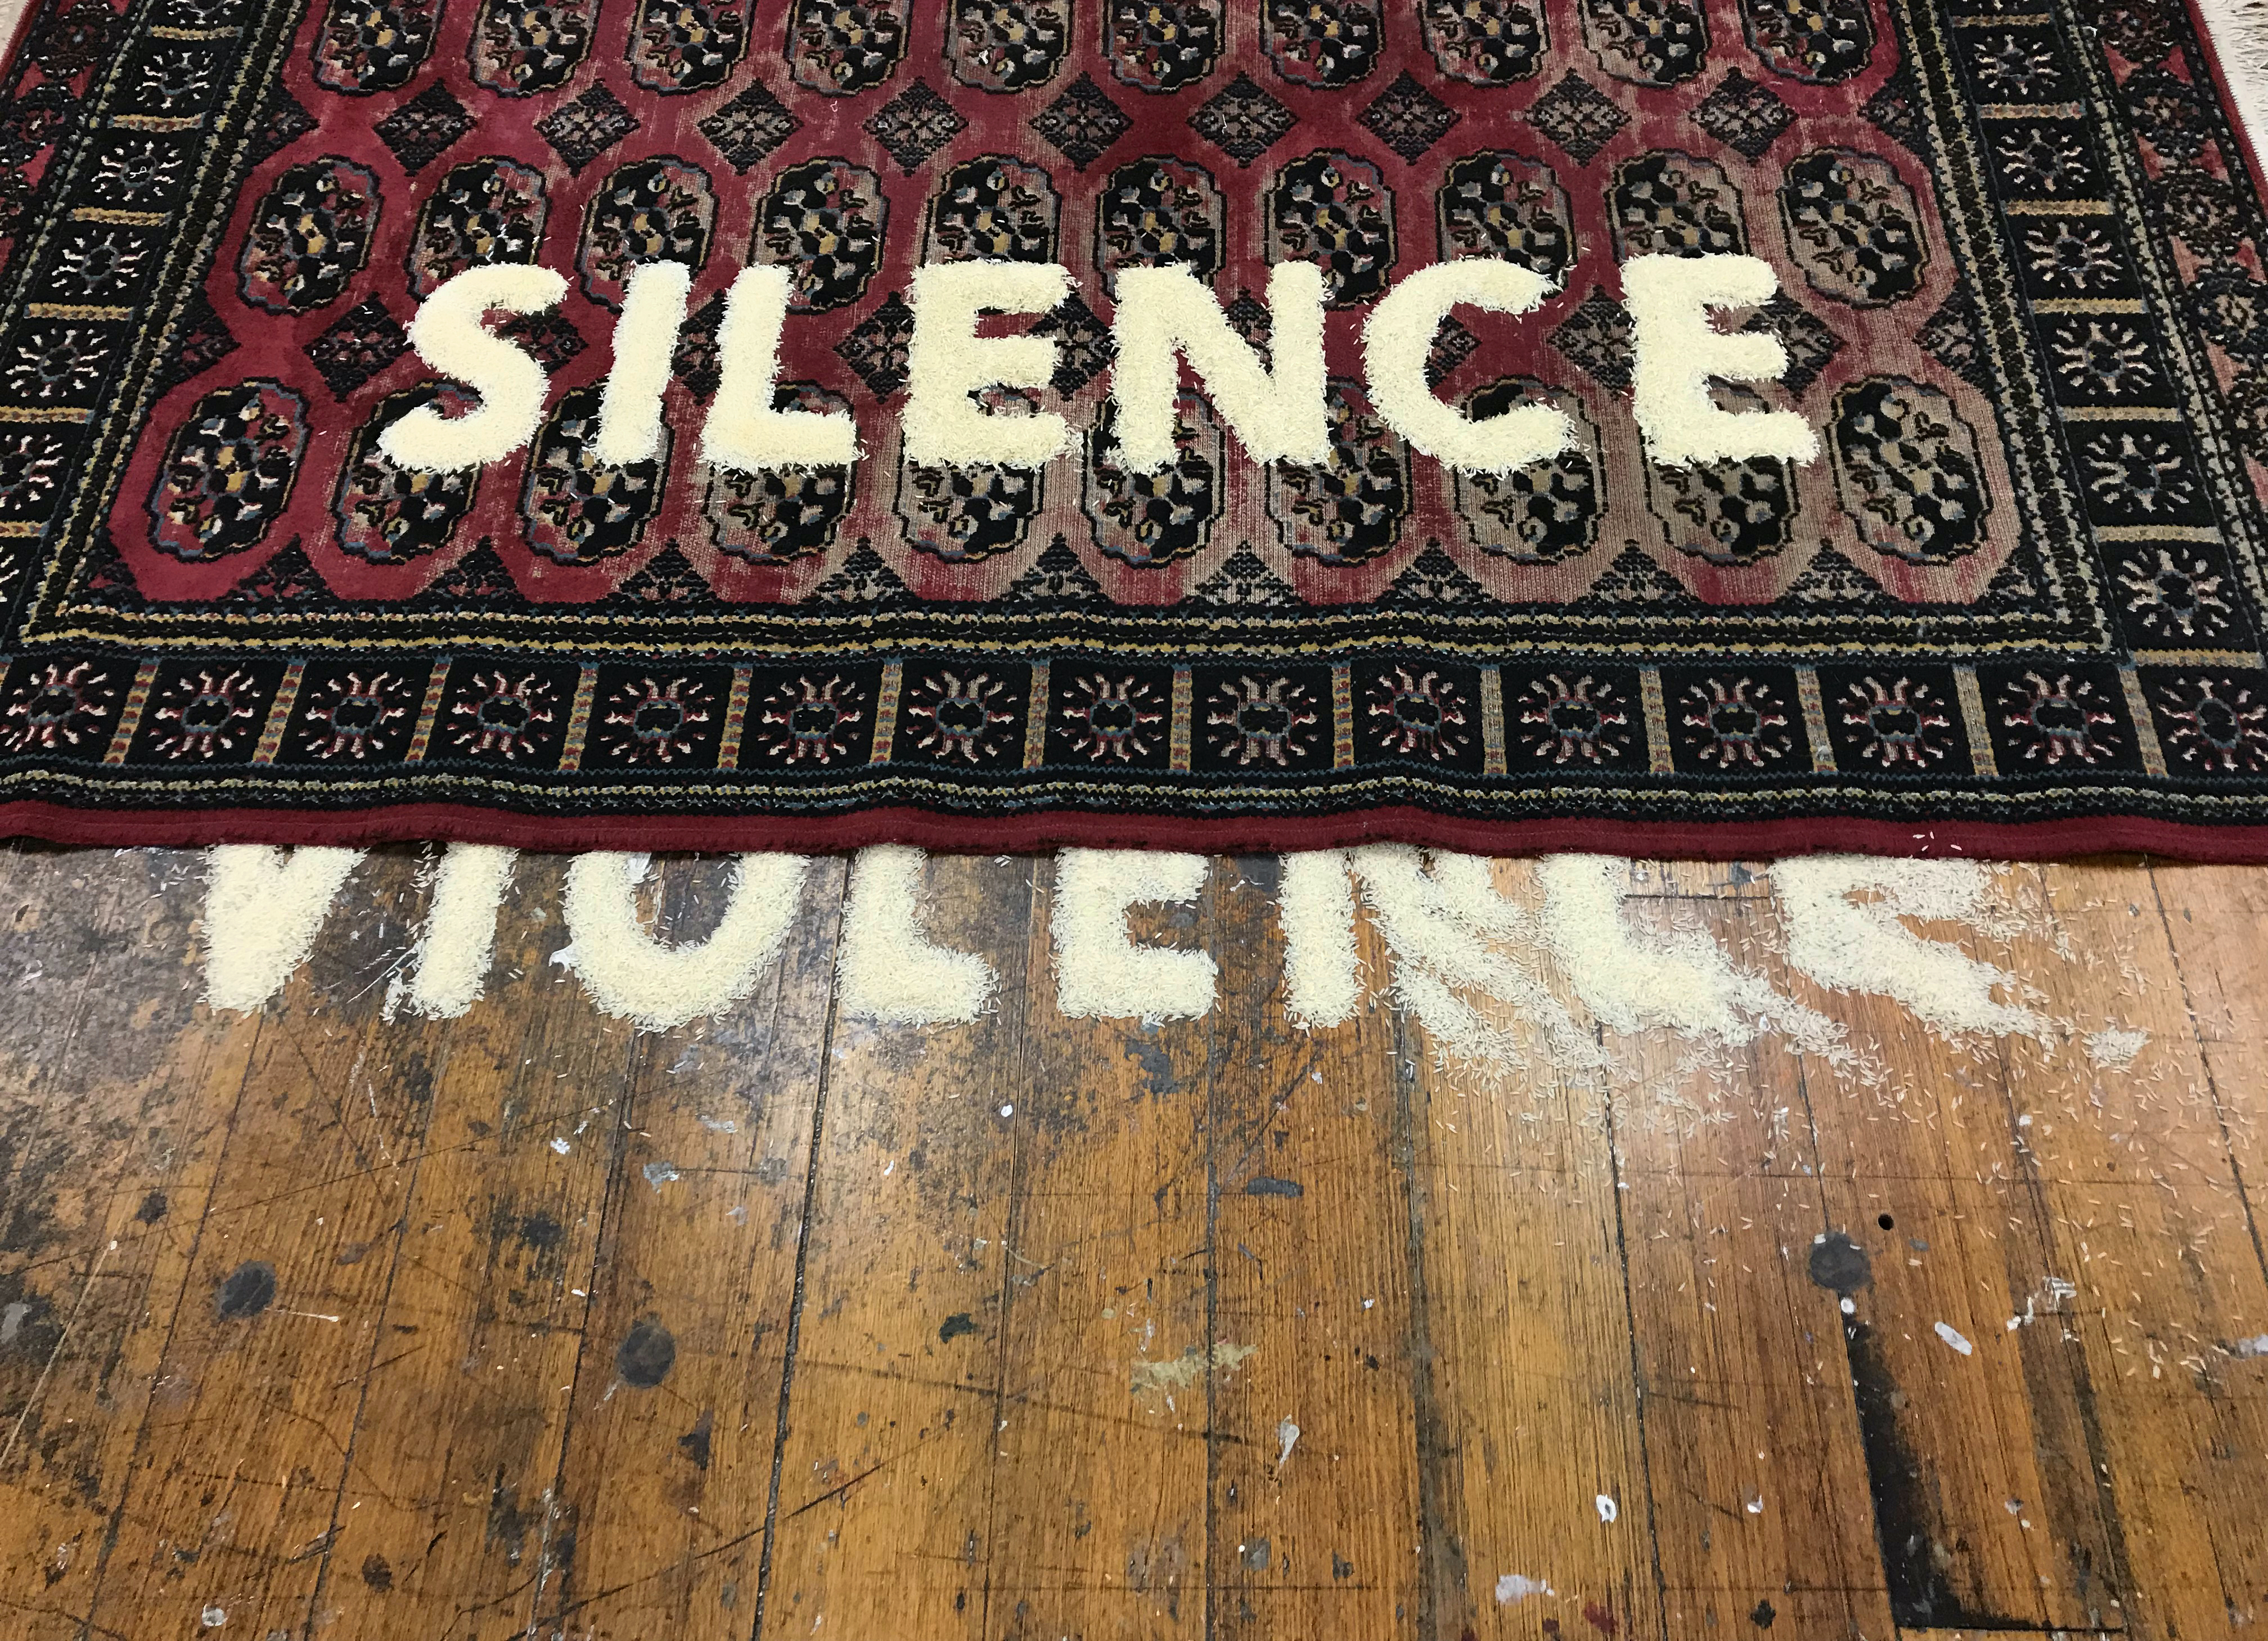 Claire Bridge, 'Silence/Violence', 2018, handwoven Bokhara rug, basmati rice, vintage books, 170 x 240cm with variable dimensions, installation view. Image courtesy the artist.